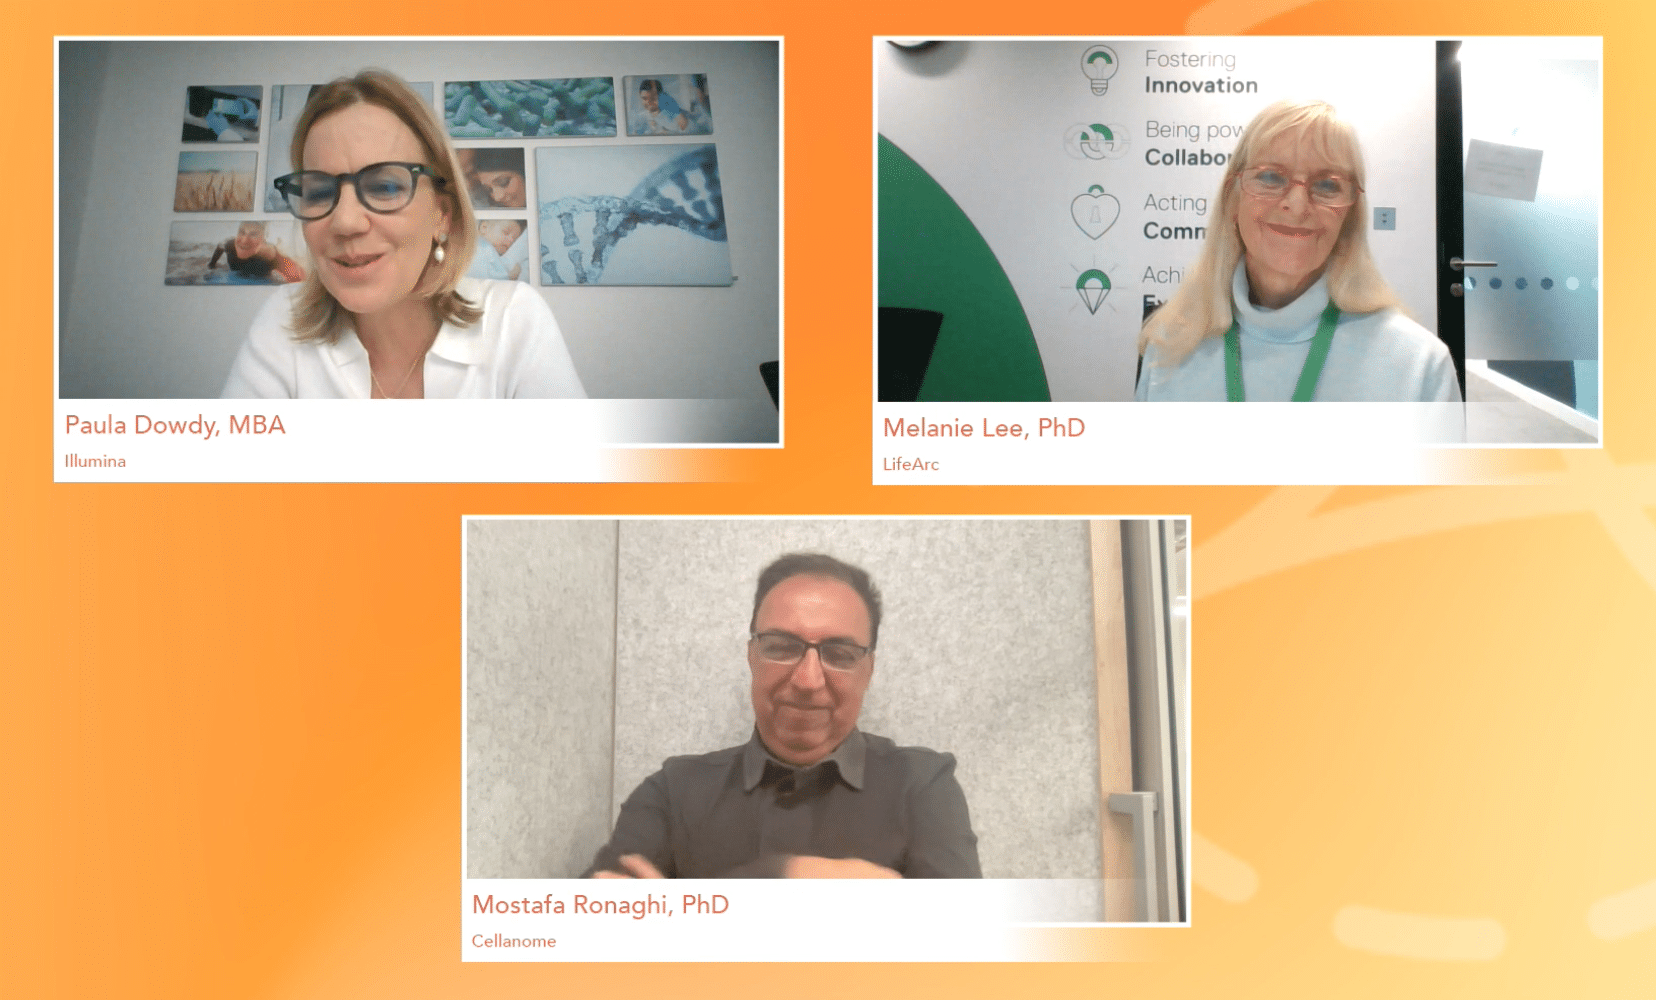 Fireside chat with  Mostafa Ronaghi of Cellanome, Melanie Lee, and Paula Dowdy of Illumina